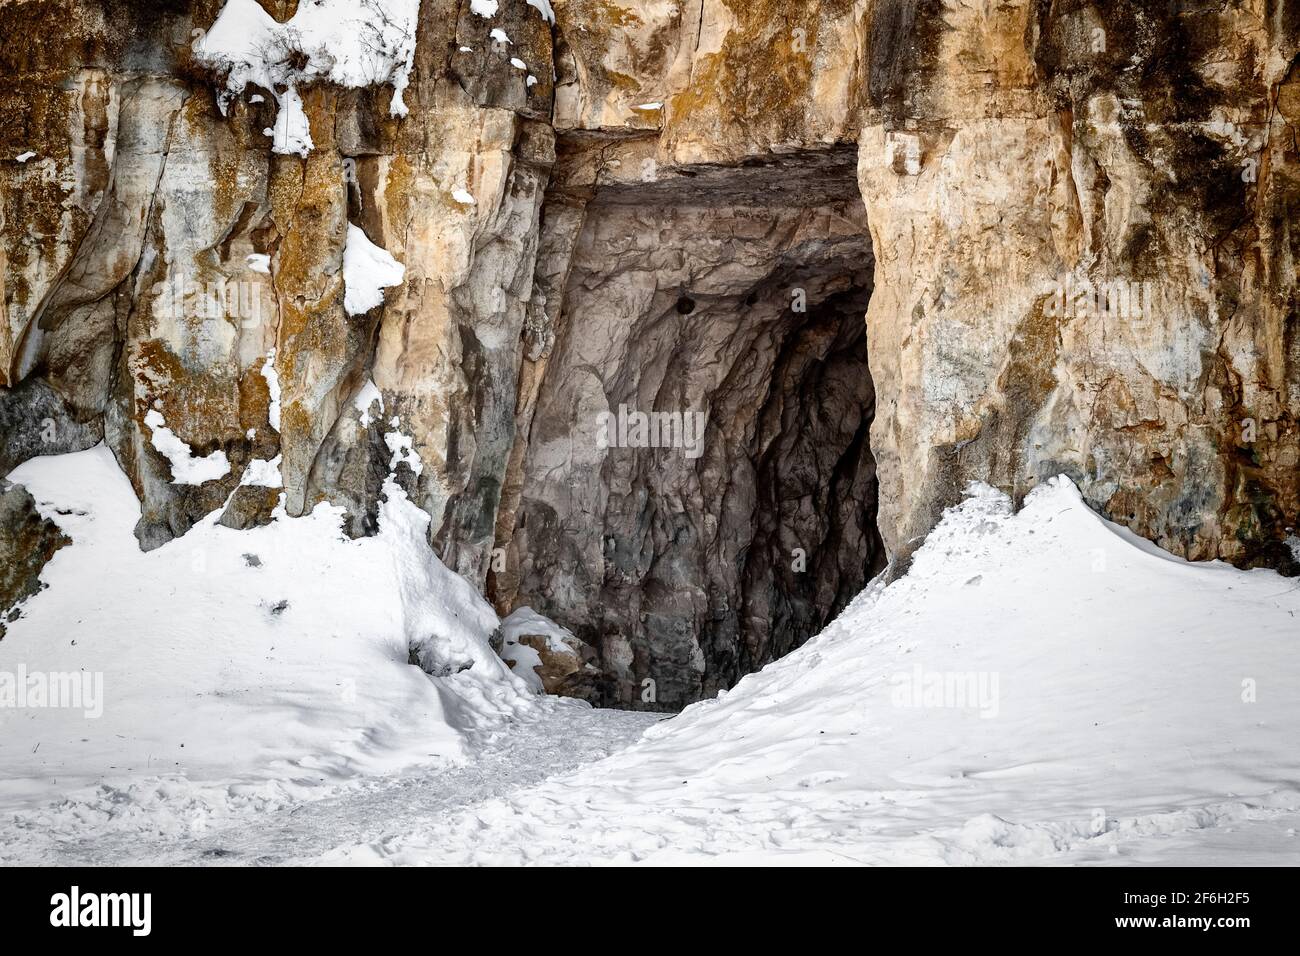 The entrance to the old abandoned limestone adits. Stock Photo